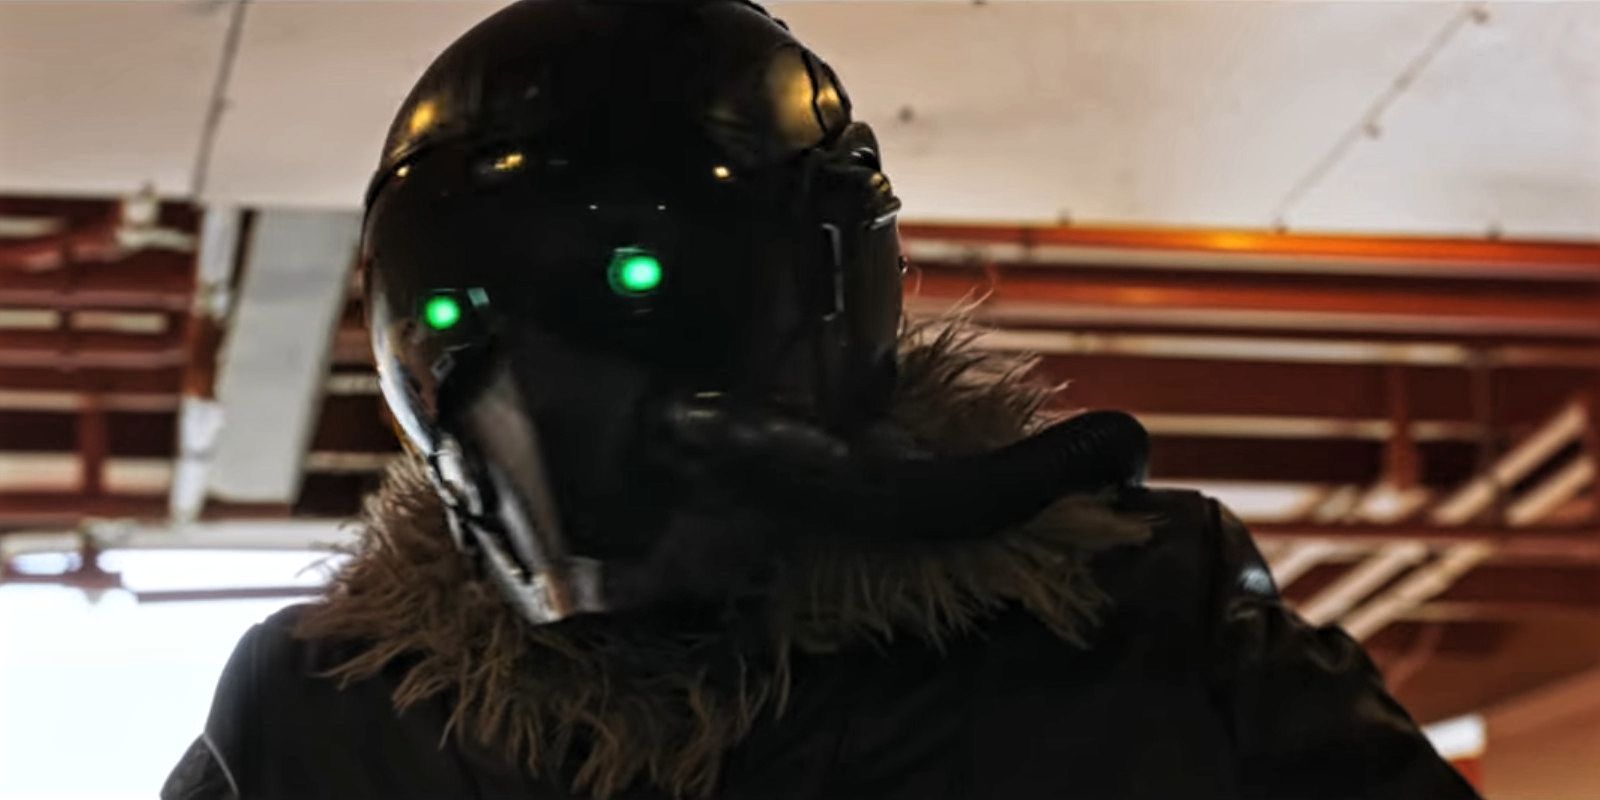 Spider-Man Homecoming - Vulture mask